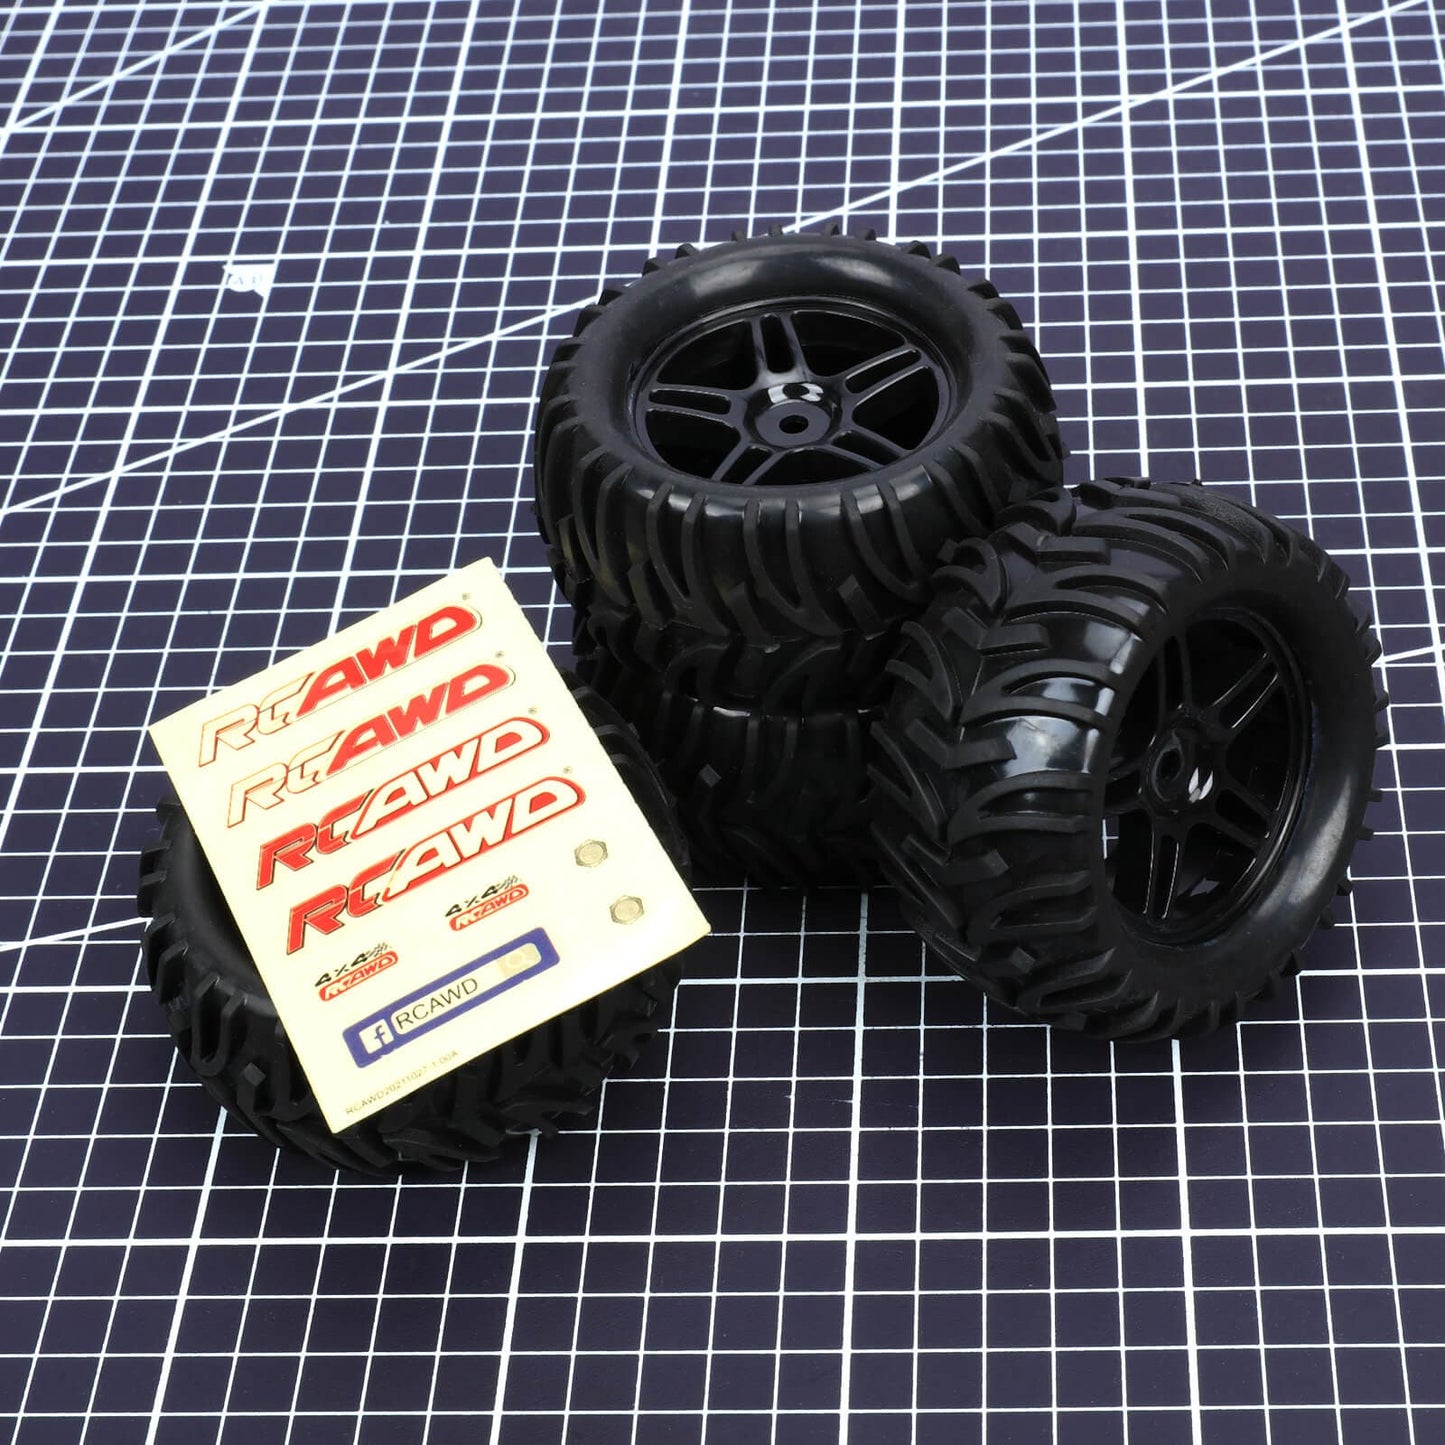 RCAWD Amazon RC Wheel & Tires 1/16 1/18 12mm Hex Pre-glued Nylon Wheel Rubber Tires V-shaped Tread for 1/16 1/18 RC Monster Truck Gl-003BL GL-004BL 的副本